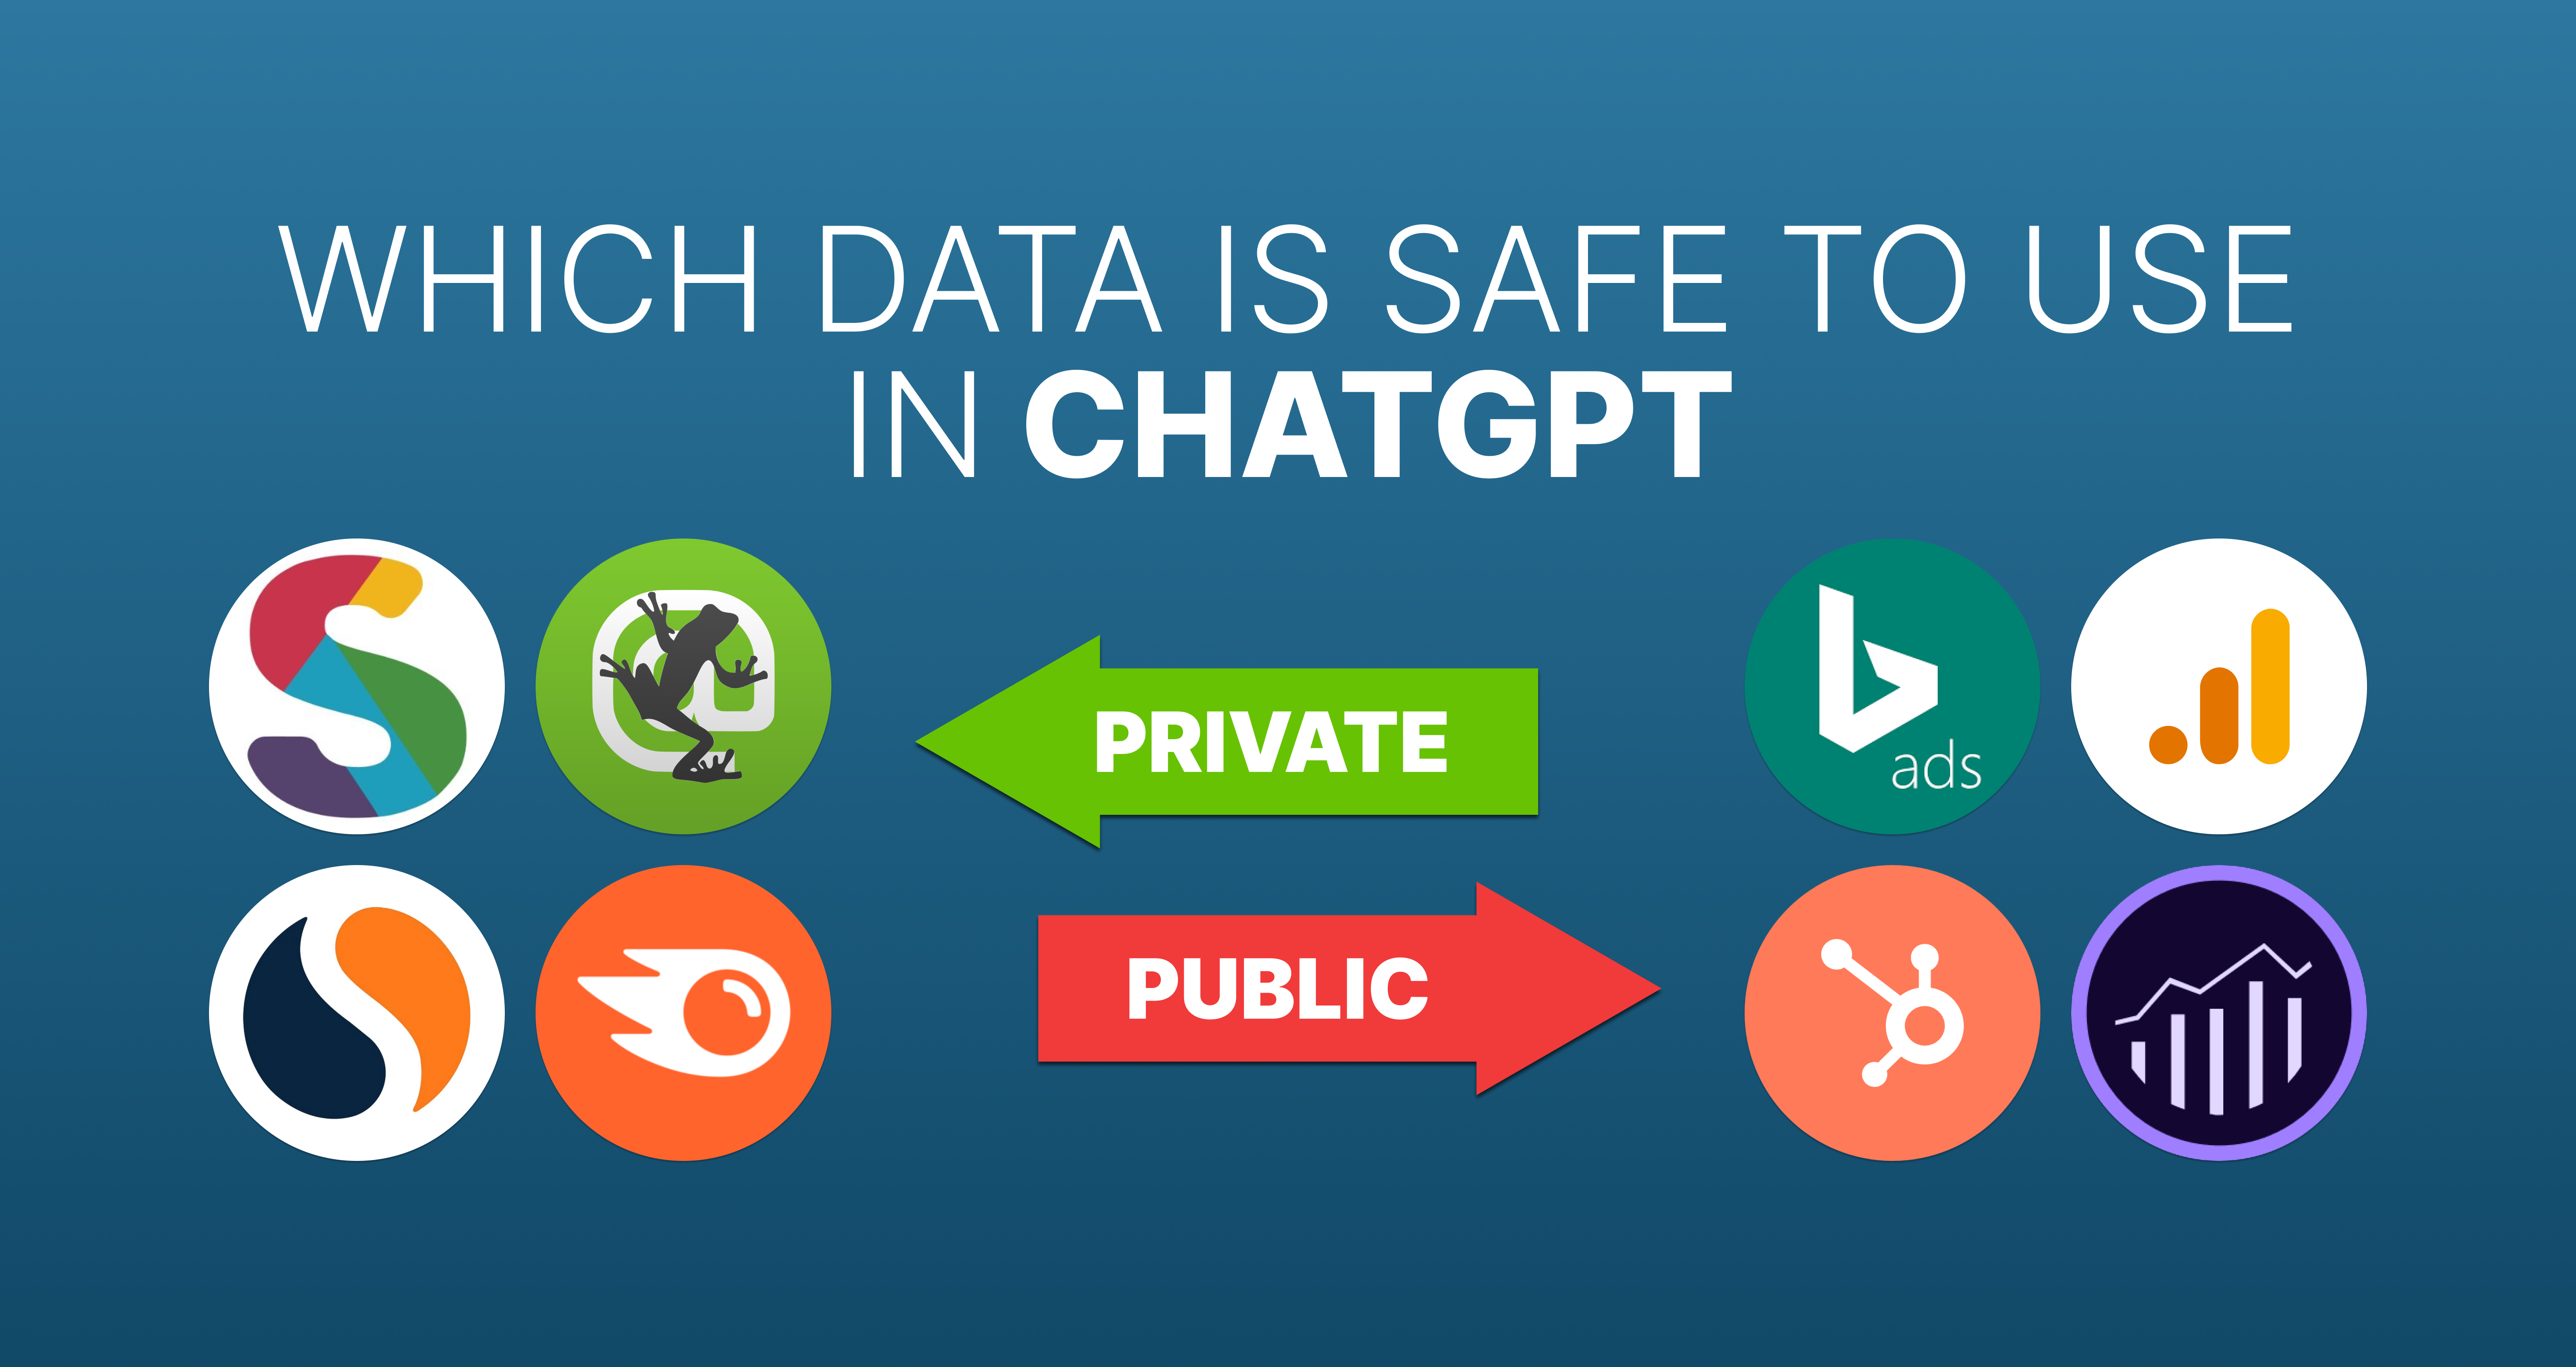 What Marketing Data is Safe to Use in ChatGPT?